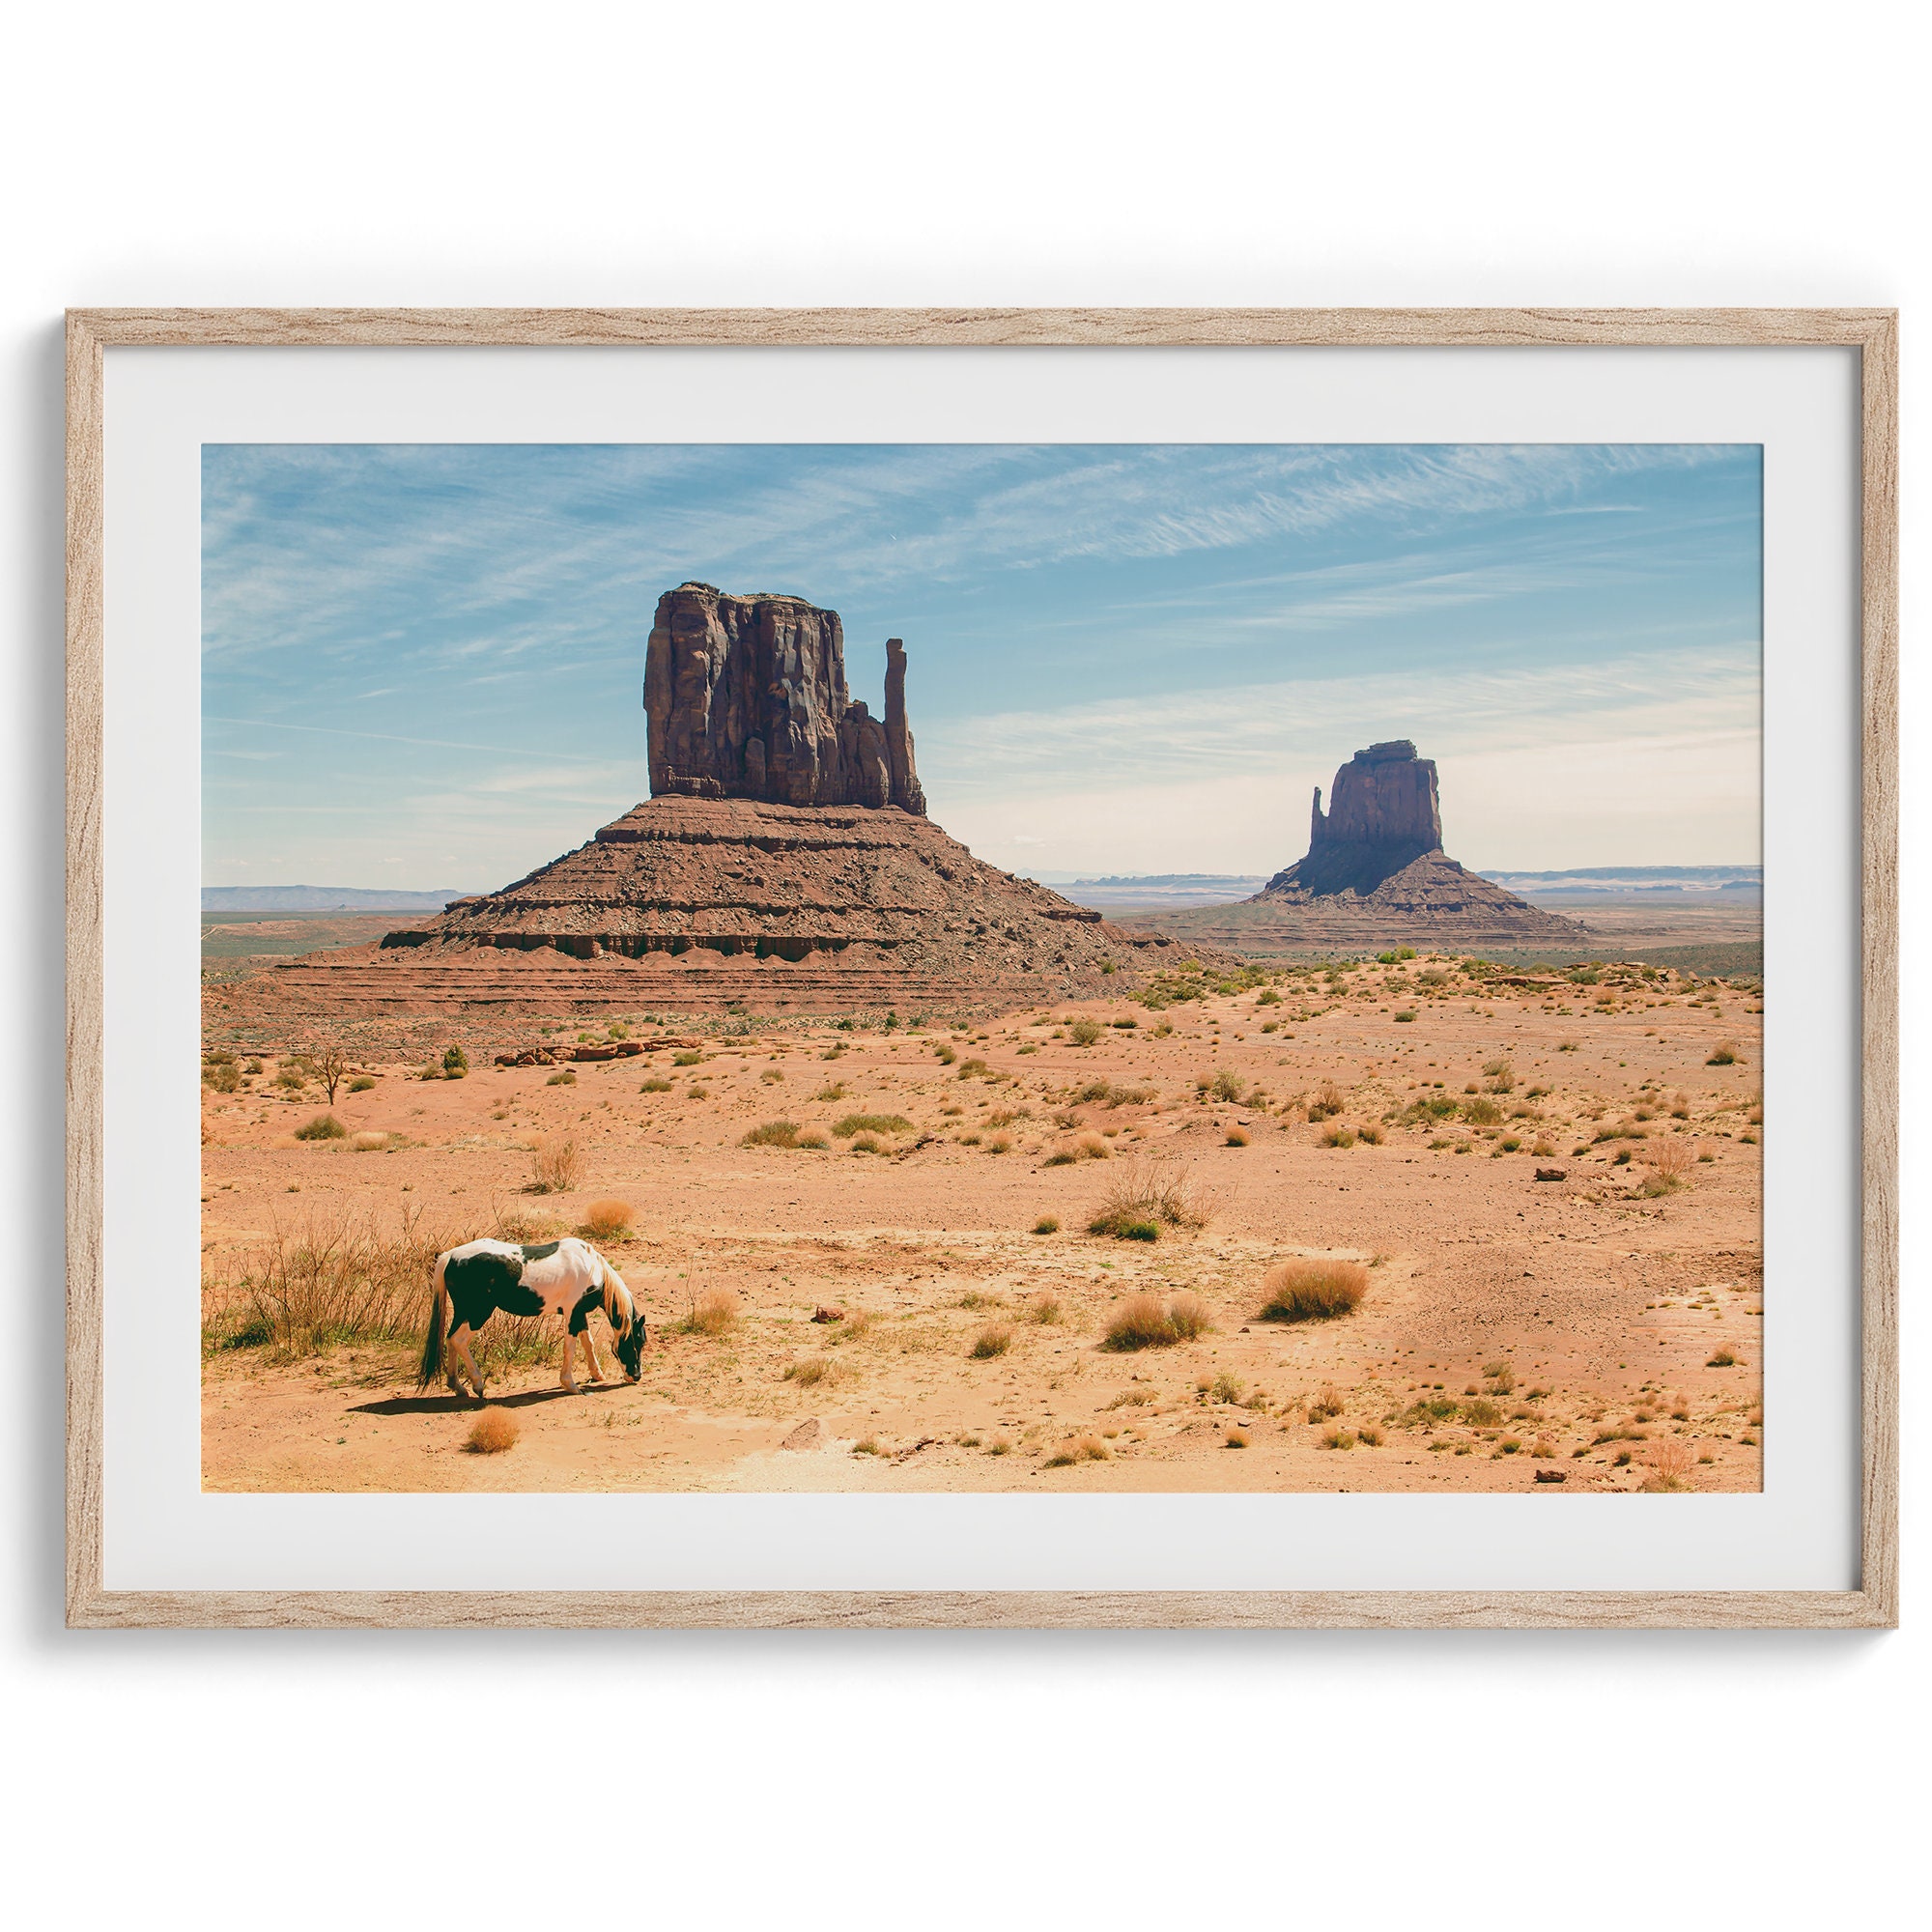 Monument Valley Poster - Etsy